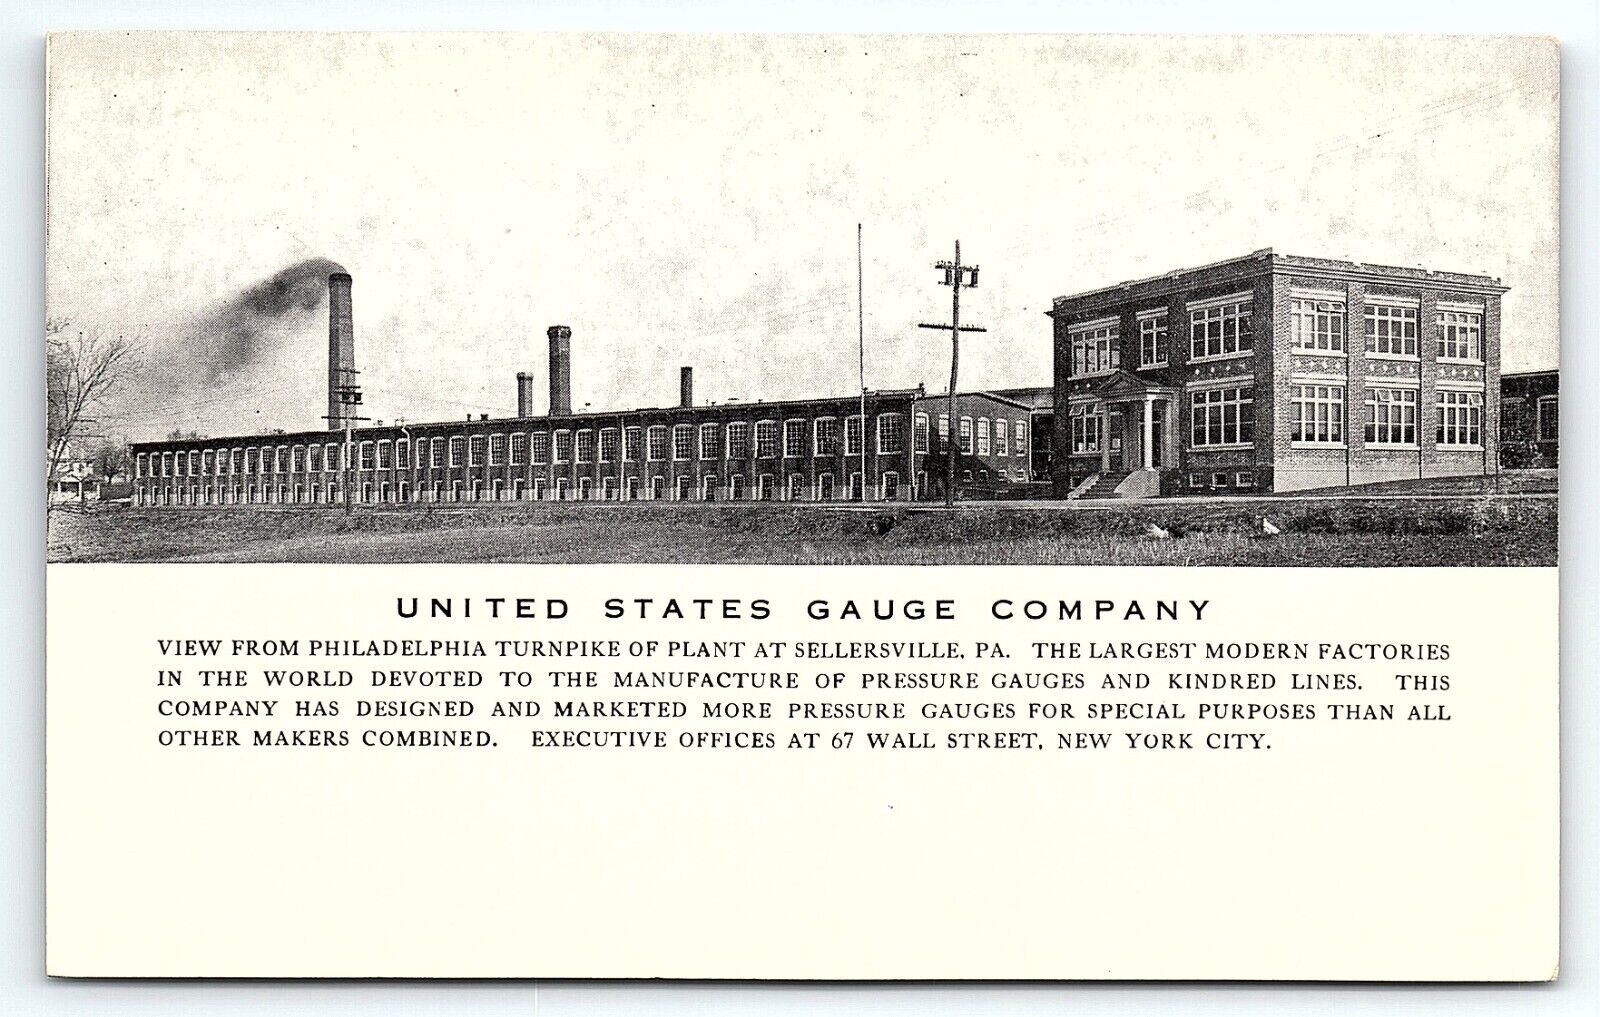 c1910 SELLERSVILLE PA UNITED STATES GAUGE COMPANY FACTORY EARLY POSTCARD P4003